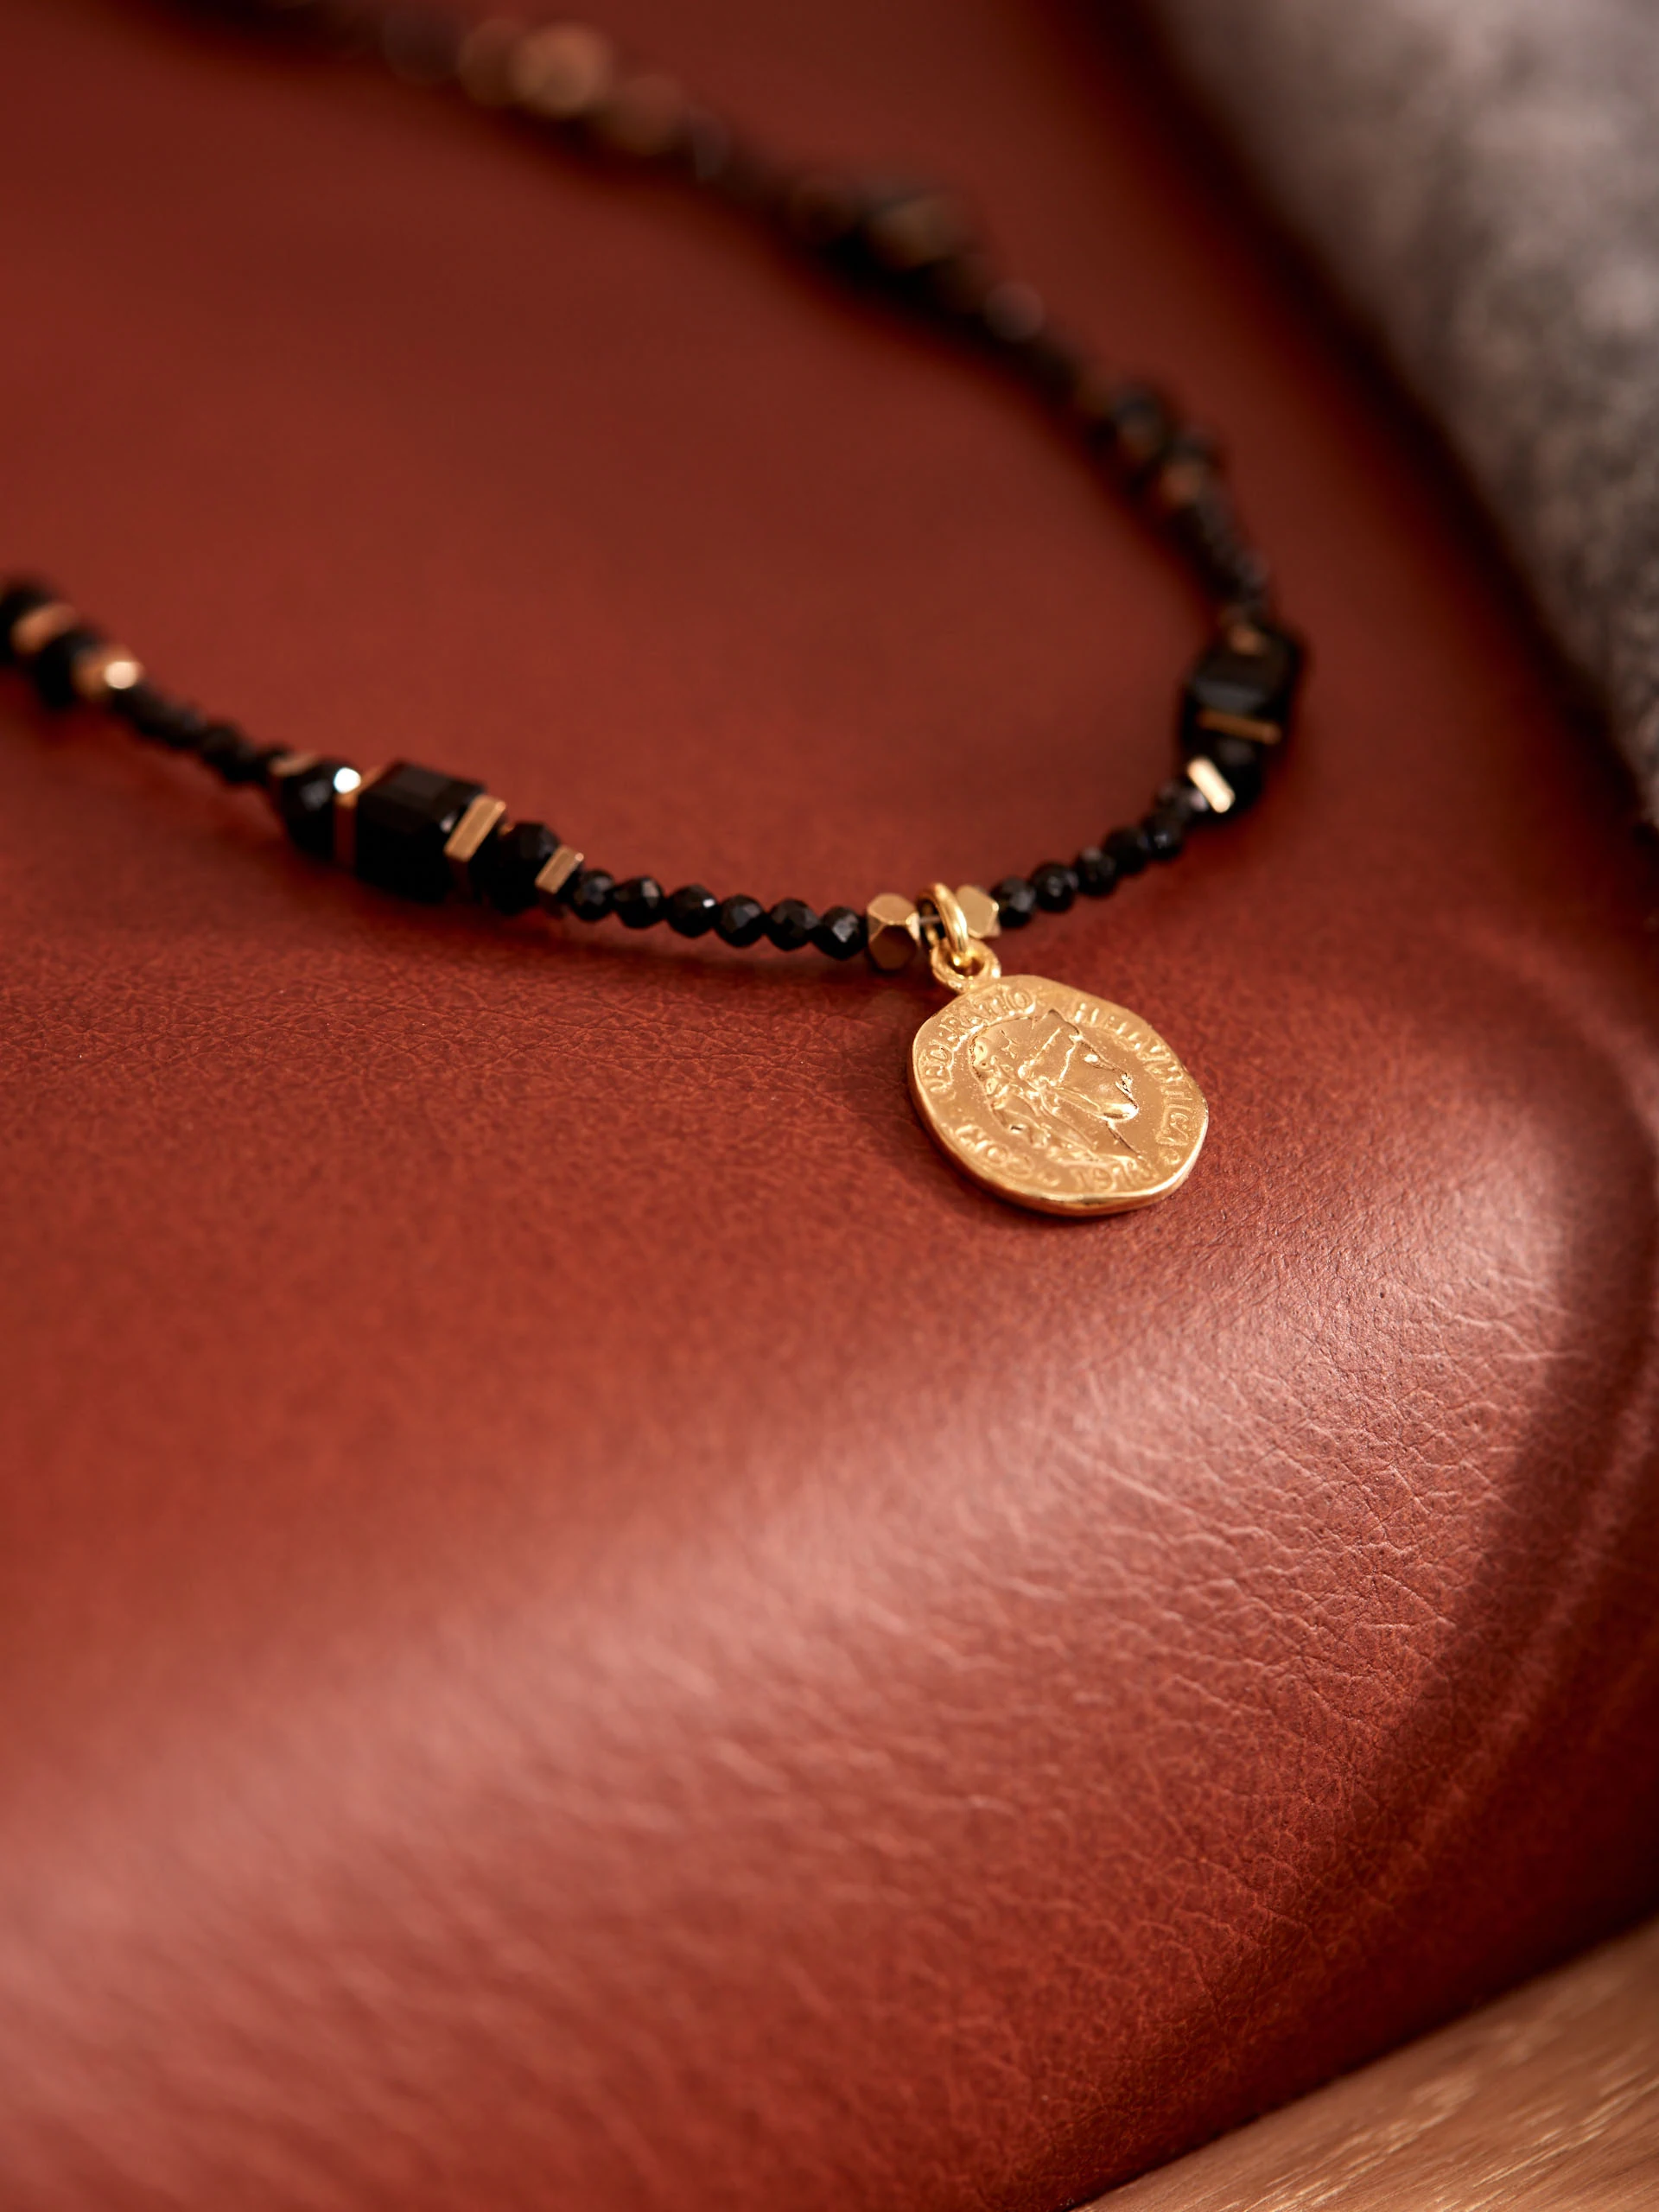 NECKLACE OF GOLD-PLATED SILVER WITH A COIN